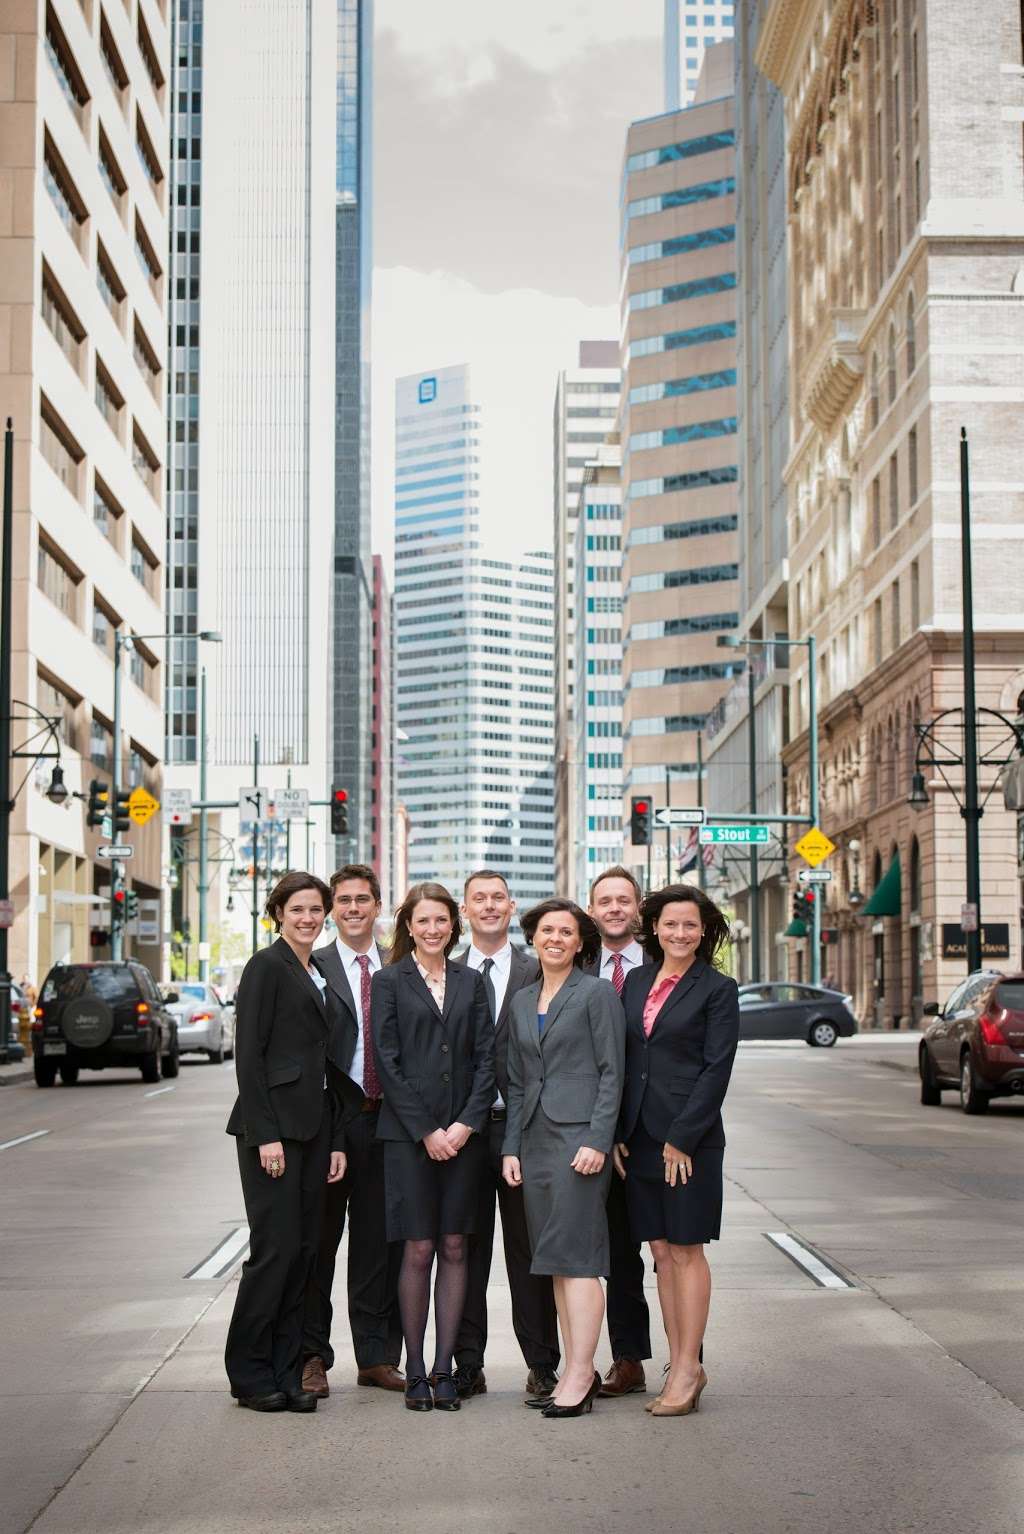 Childs McCune Attorneys | 821 17th St #500, Denver, CO 80202, USA | Phone: (303) 296-7300